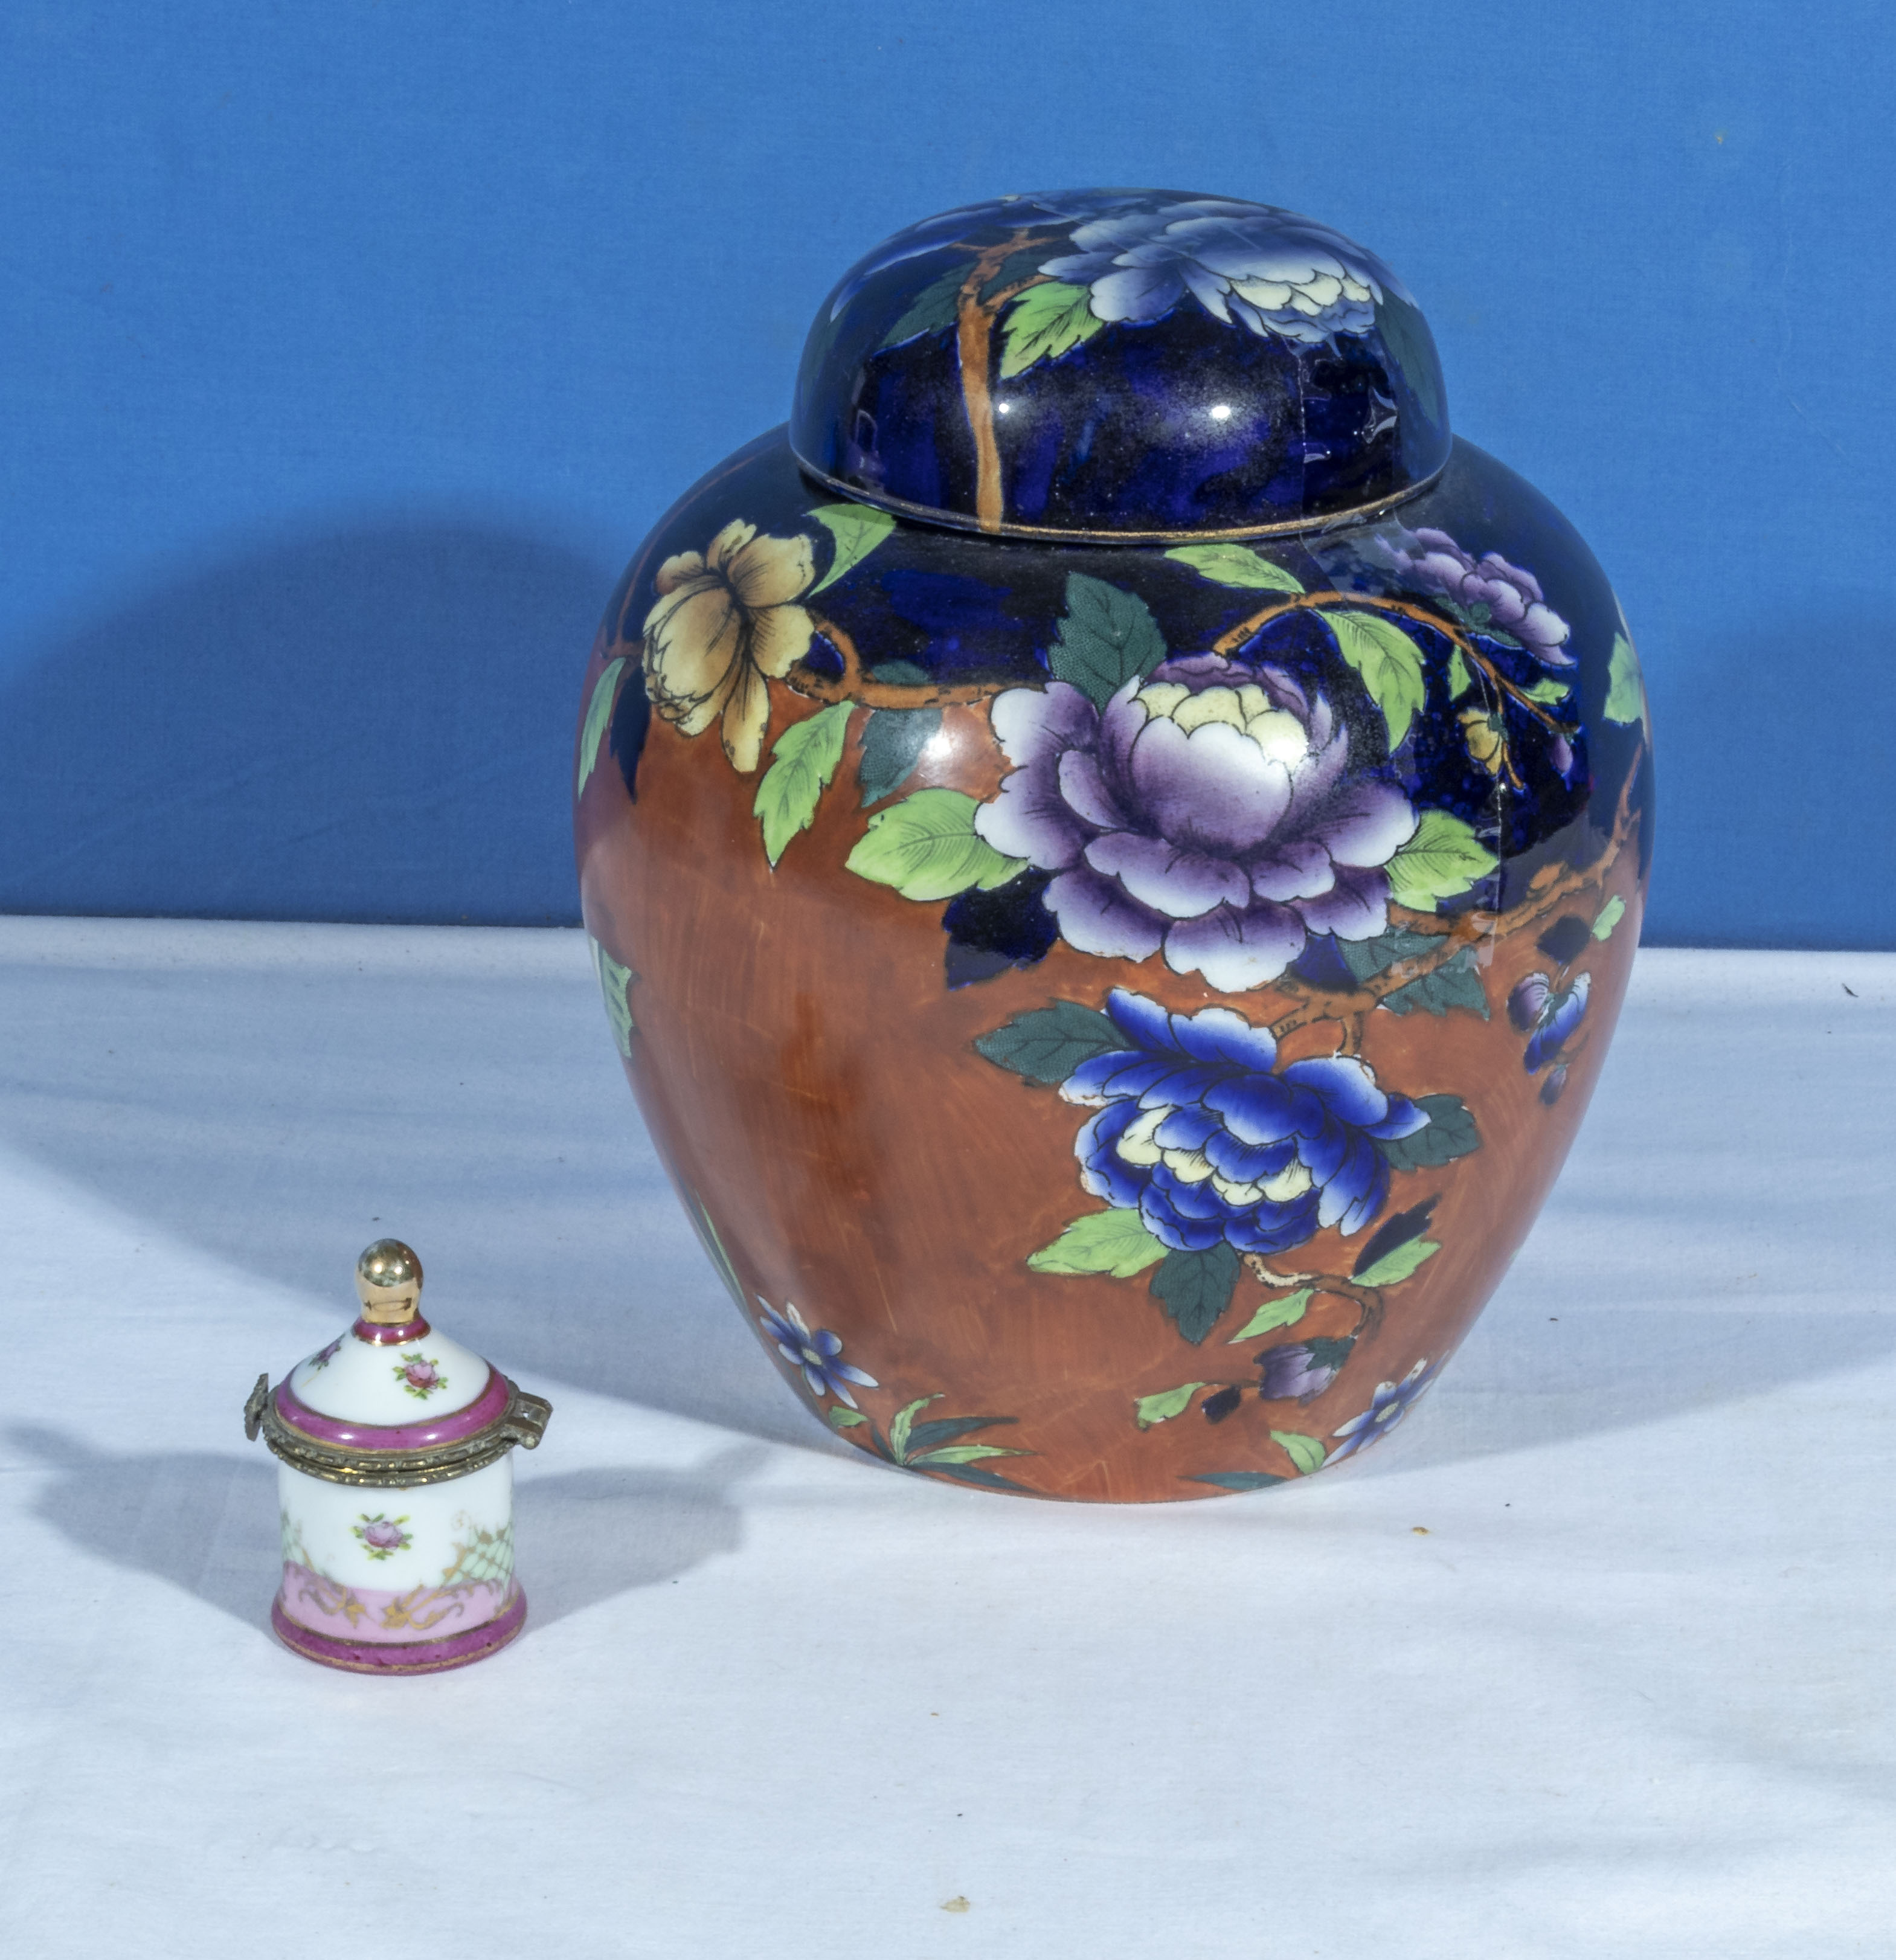 A Maling ware ginger jar and a small porcelain container